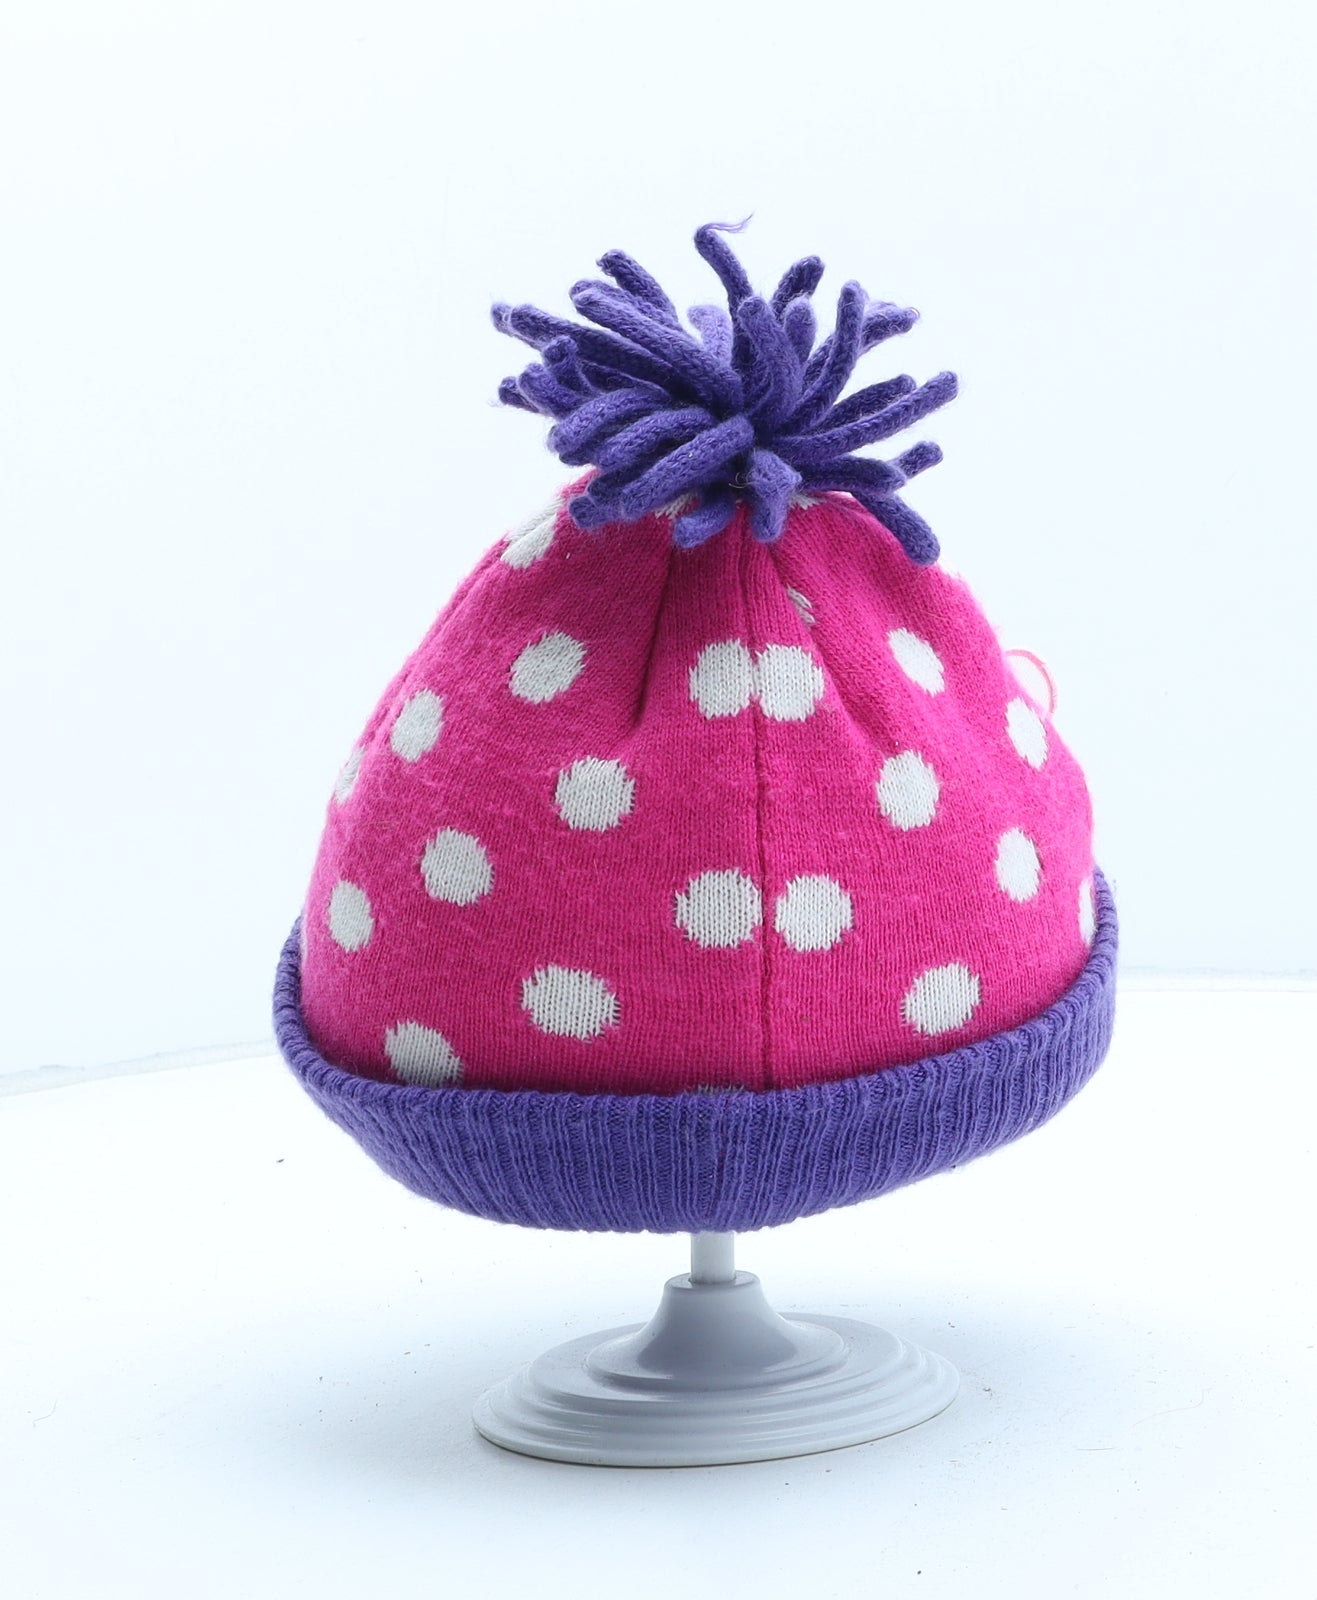 George Girls Pink Polka Dot Acrylic Bobble Hat One Size - Peppa Pig Size 1-3 Years